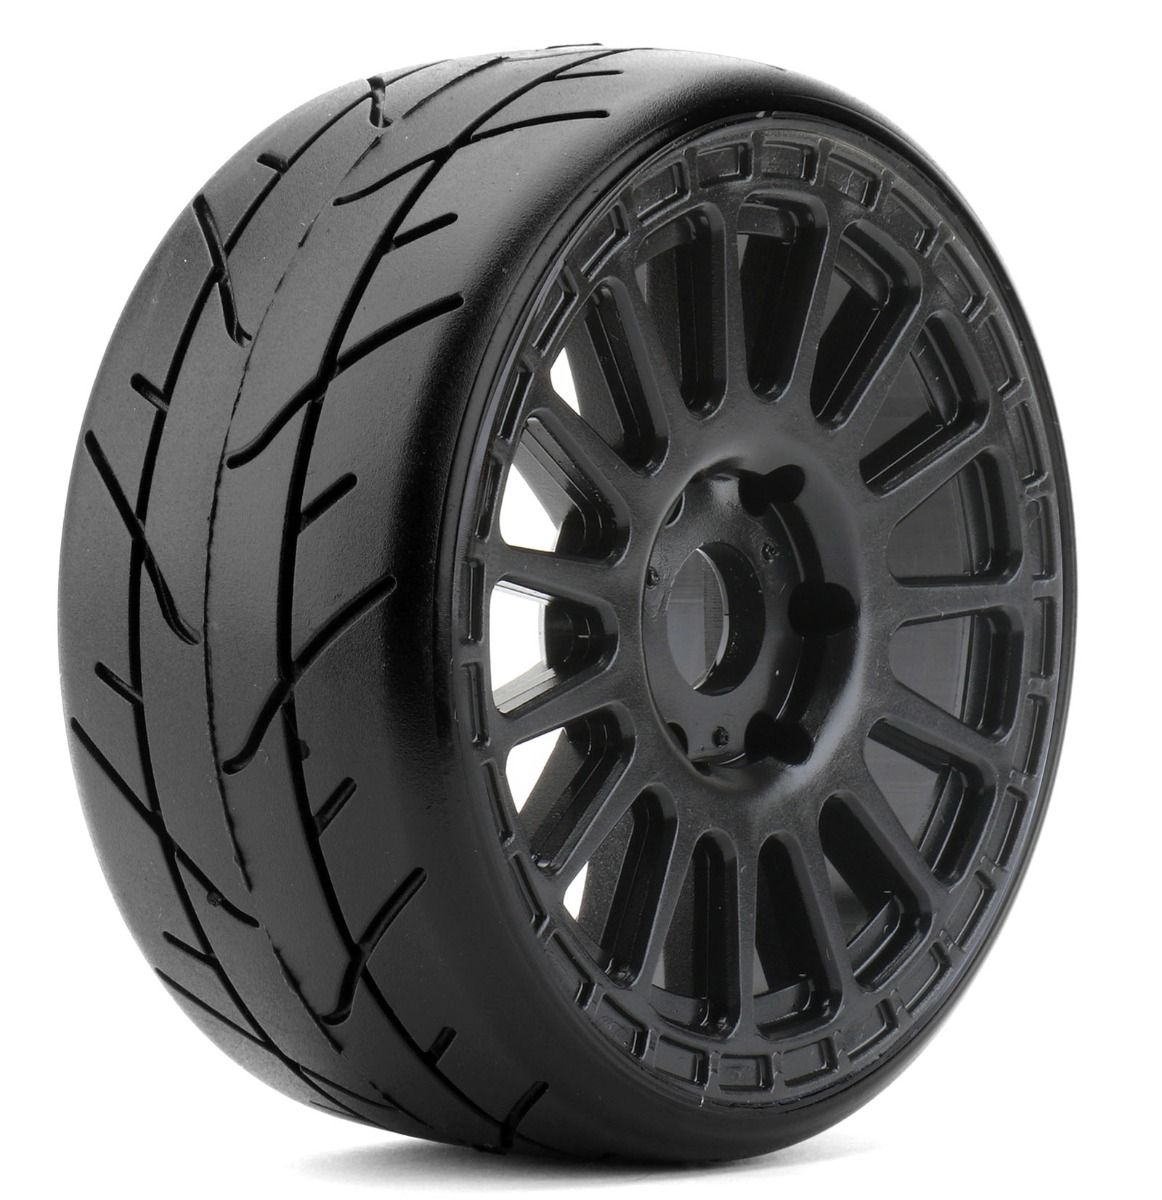 Powerhobby 1/8 GT Diablo Belted Pre-Mounted Tires 17mm Hard Compound - PowerHobby